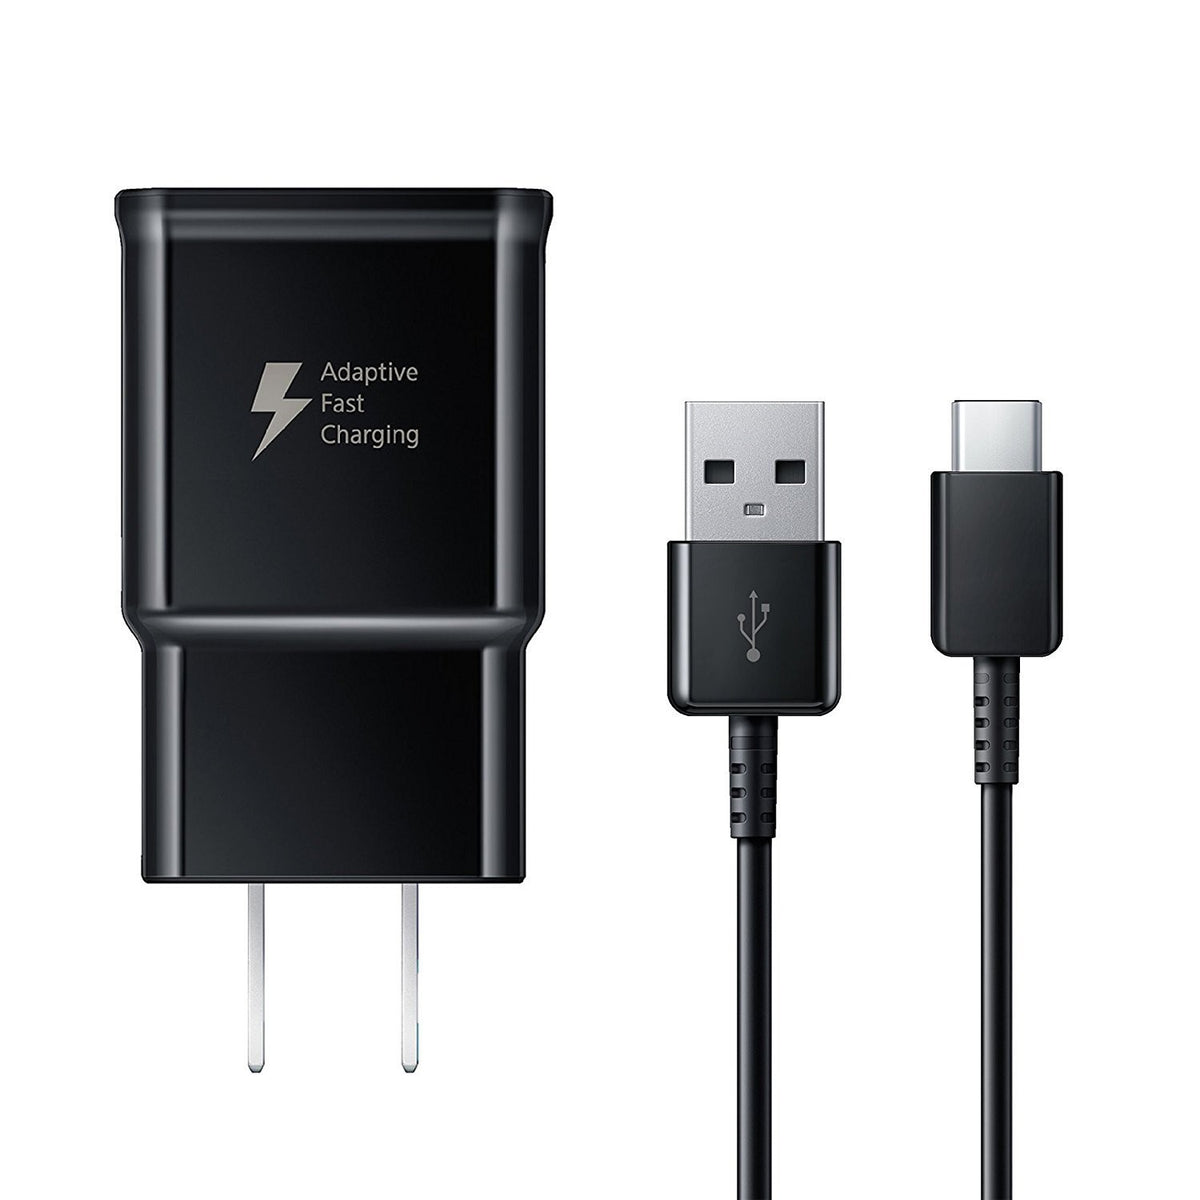 Adaptive Fast Charging uses Dual voltages for up to 50% Faster Charging Samsung Galaxy Tab E 9.6 Adaptive Fast Charger Micro USB 2.0 Cable Kit! Bulk Packaging 1 Wall Charger + 5 FT Micro USB Cable